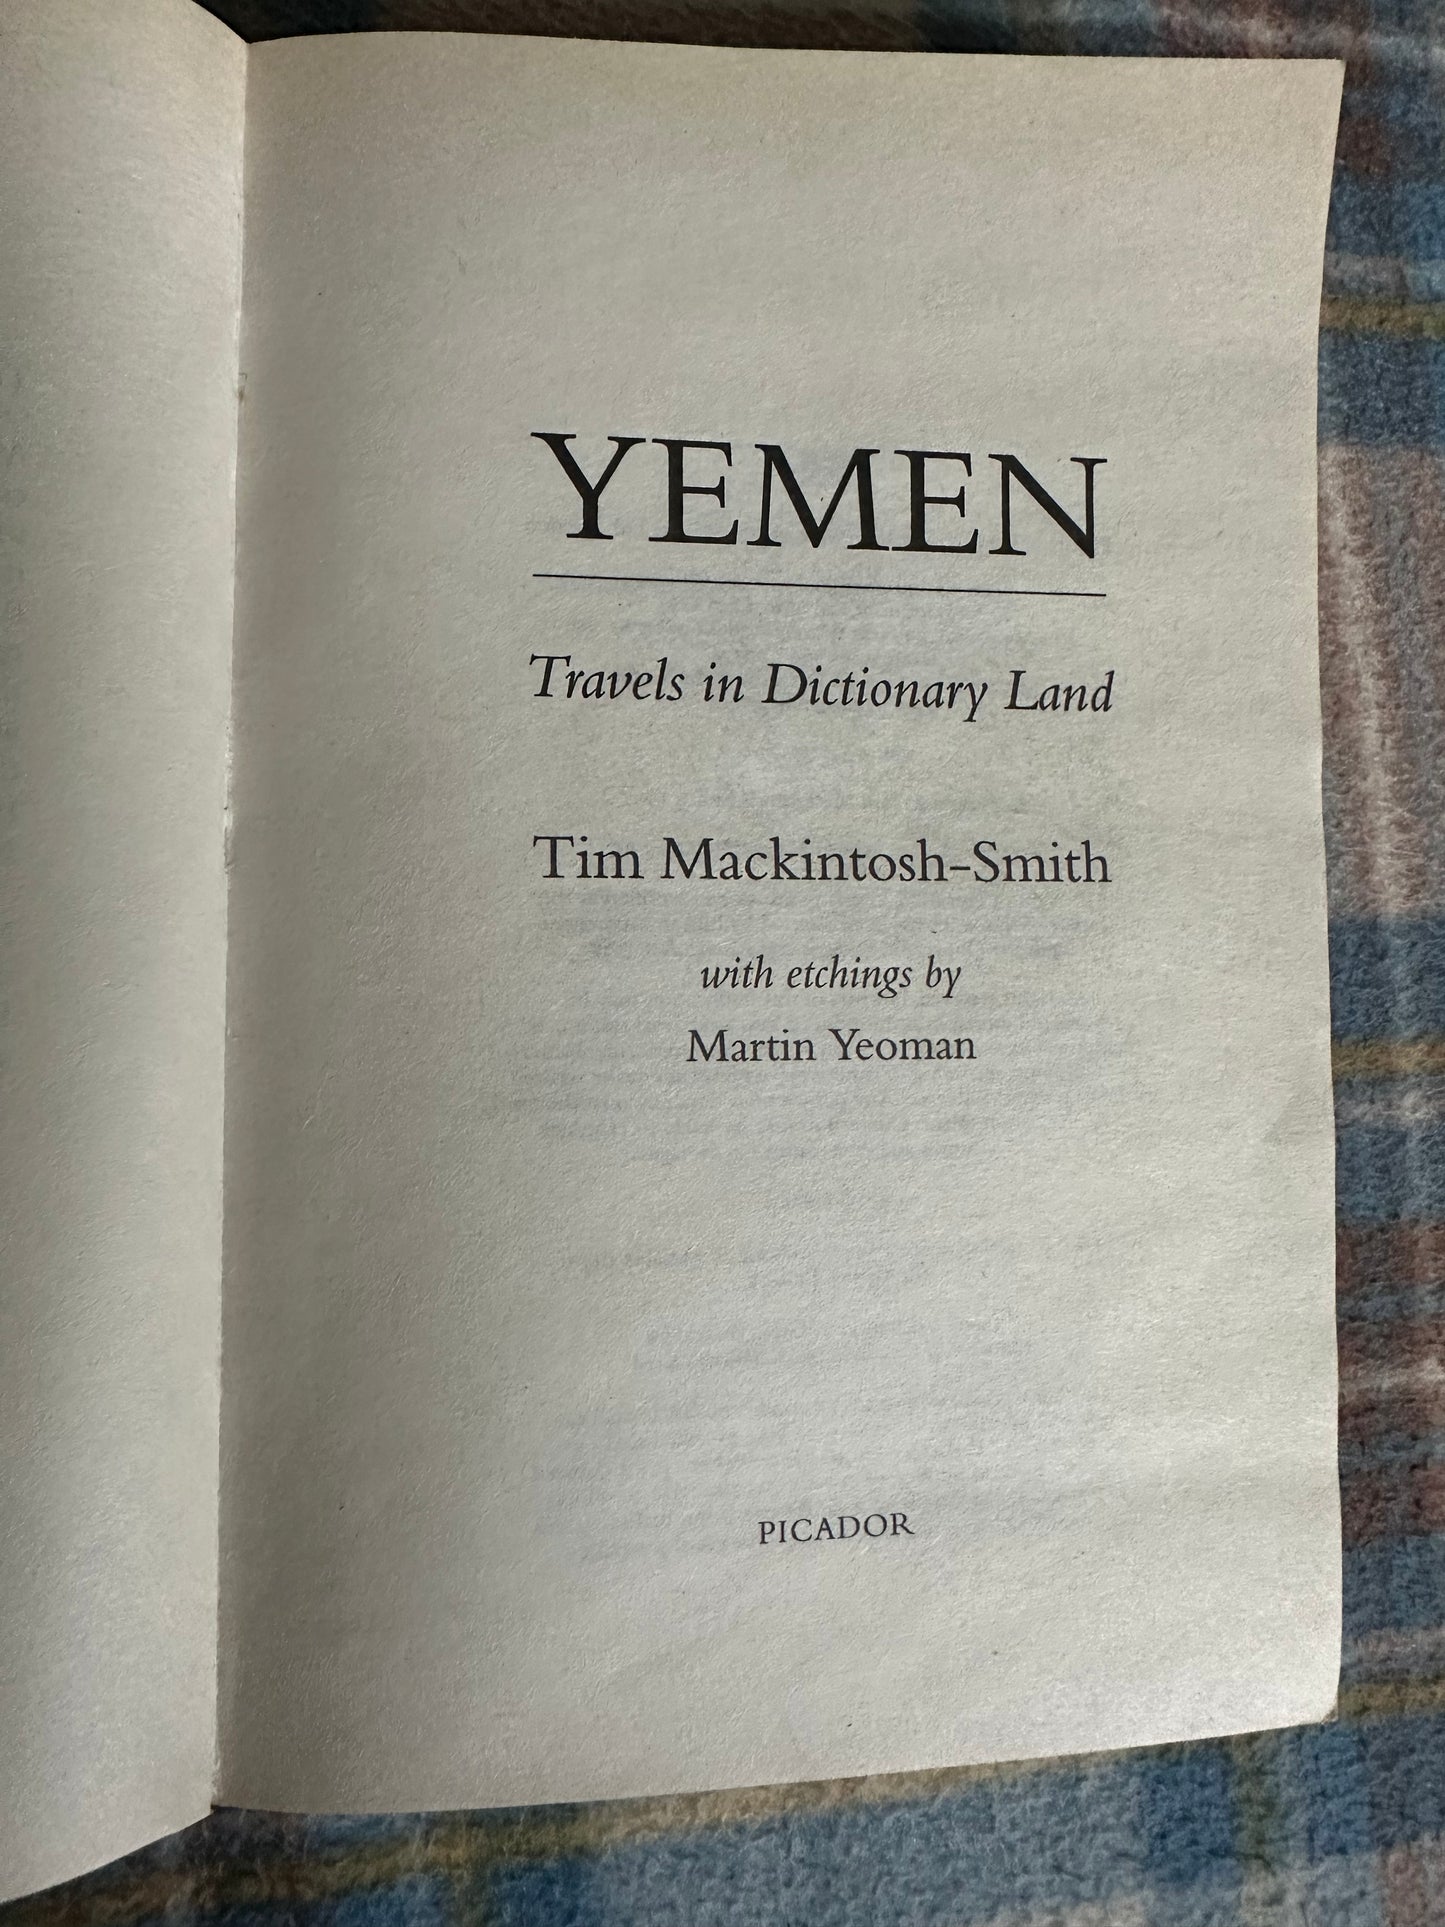 1997 Yemen(Travels in Dictionary Land) - Tim Mackintosh-Smith(Picador)